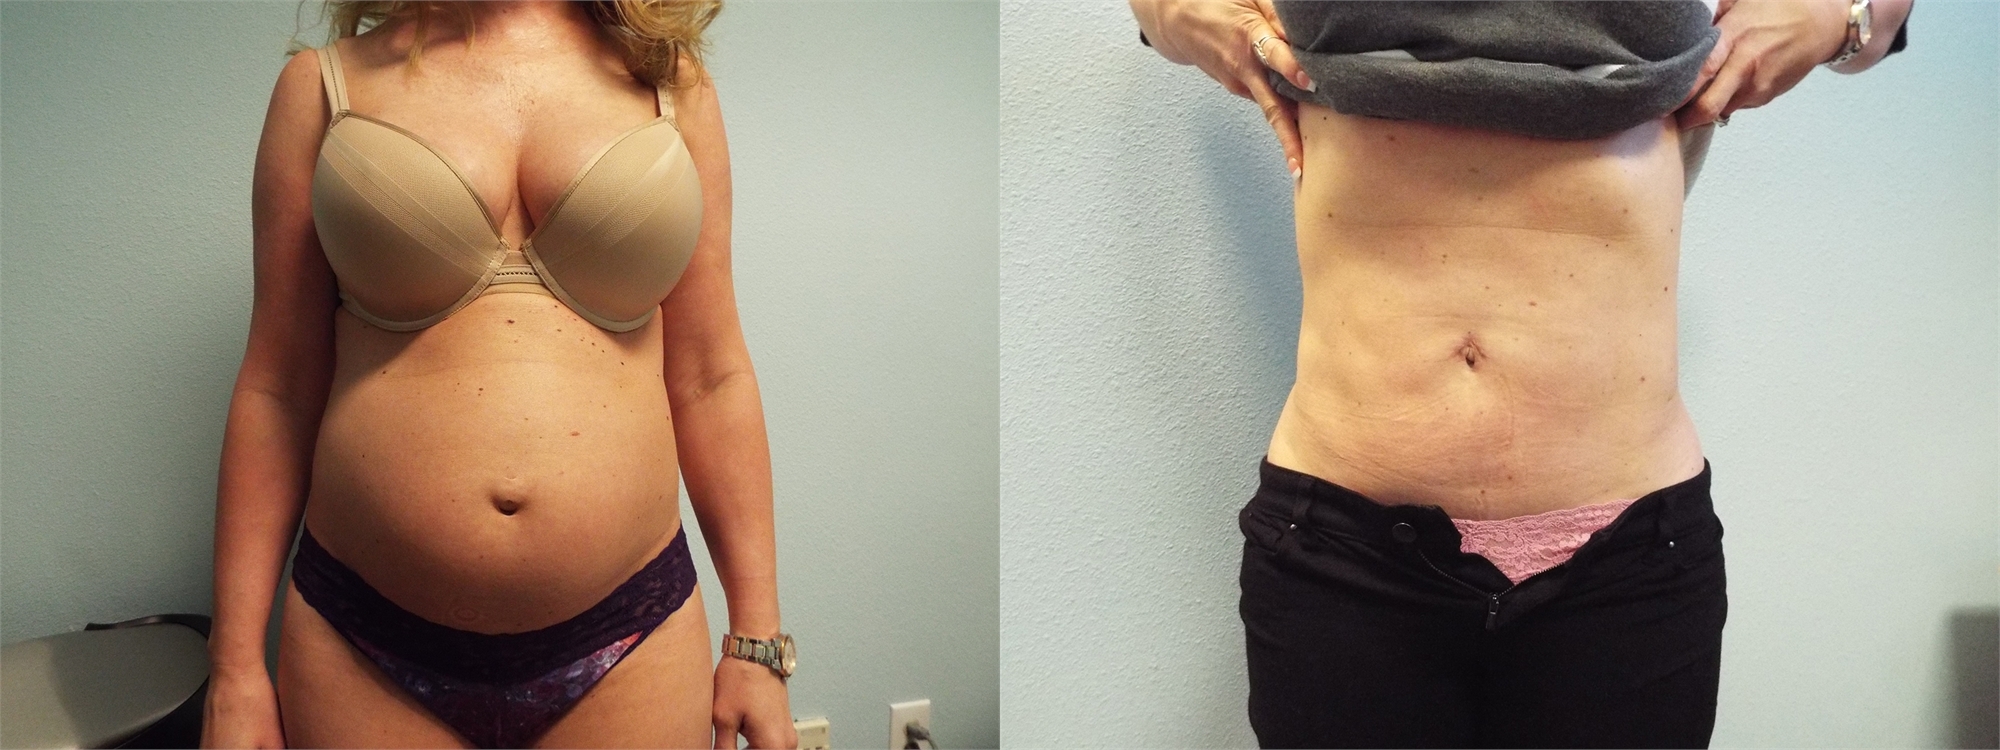 Laser Liposuction Before and After Tacoma, WA